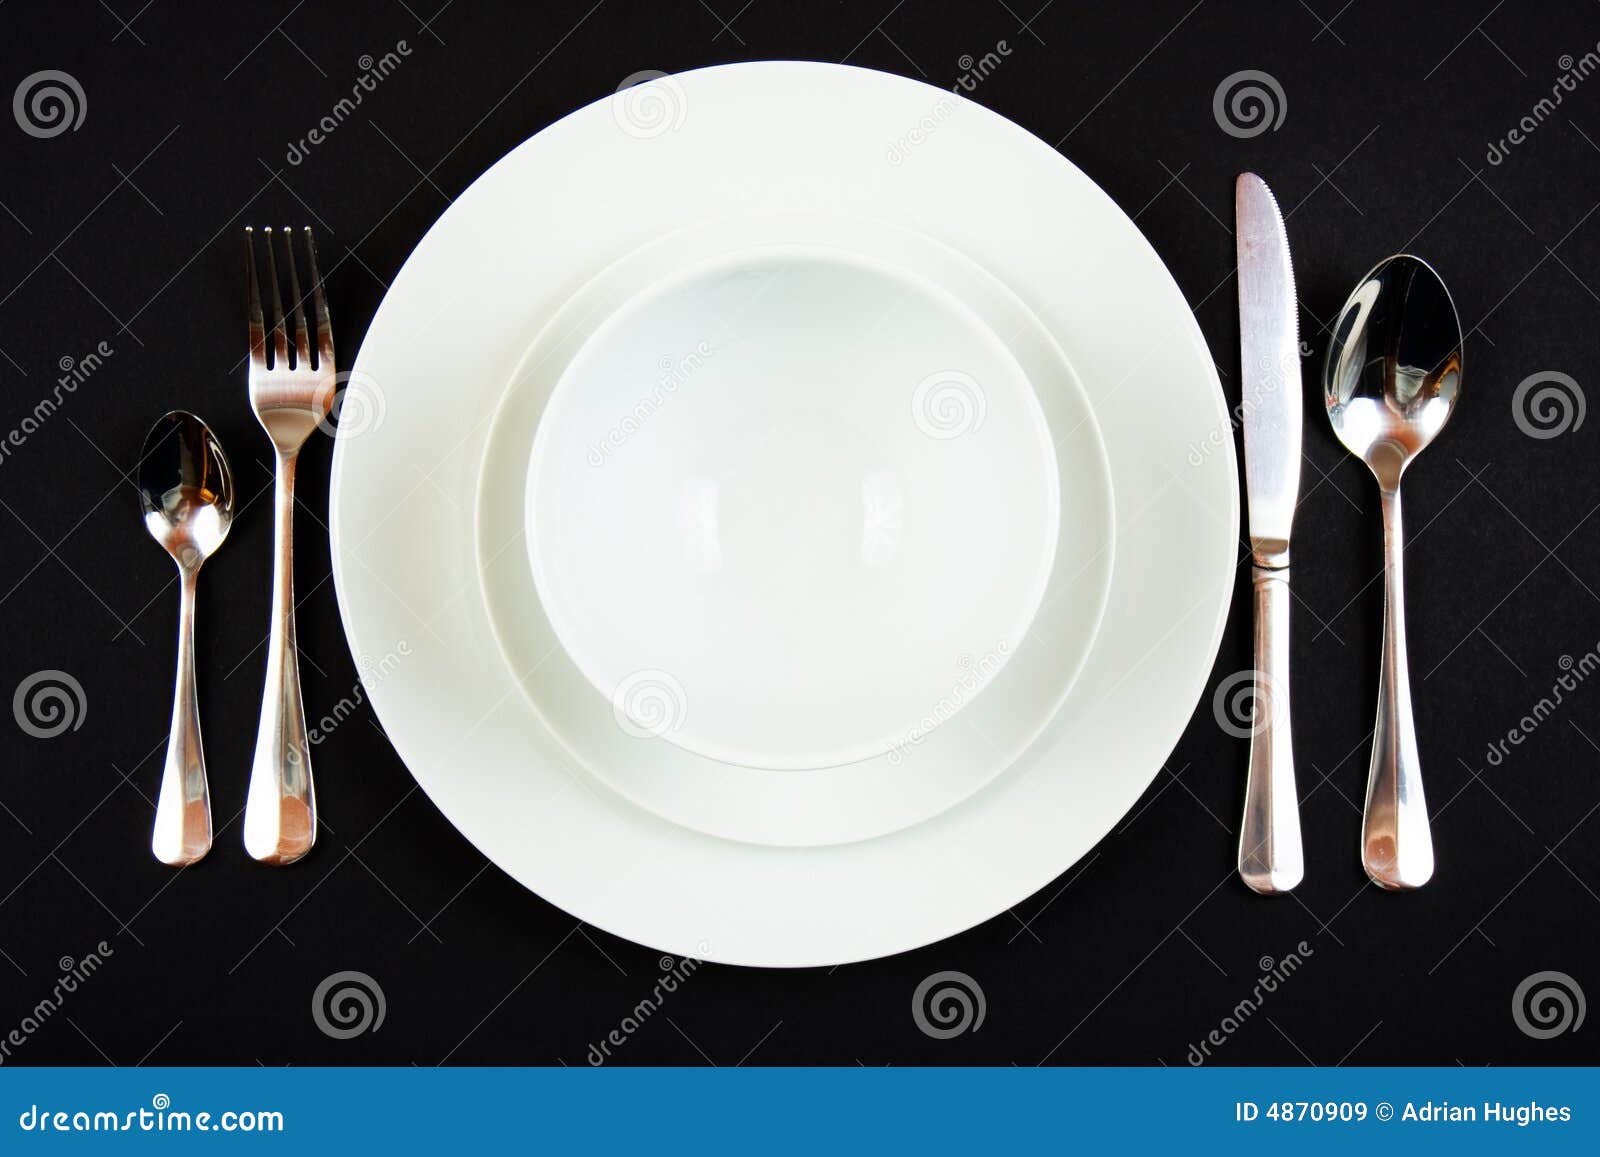 Place setting for dinner stock image. Image of dinner - 4870909